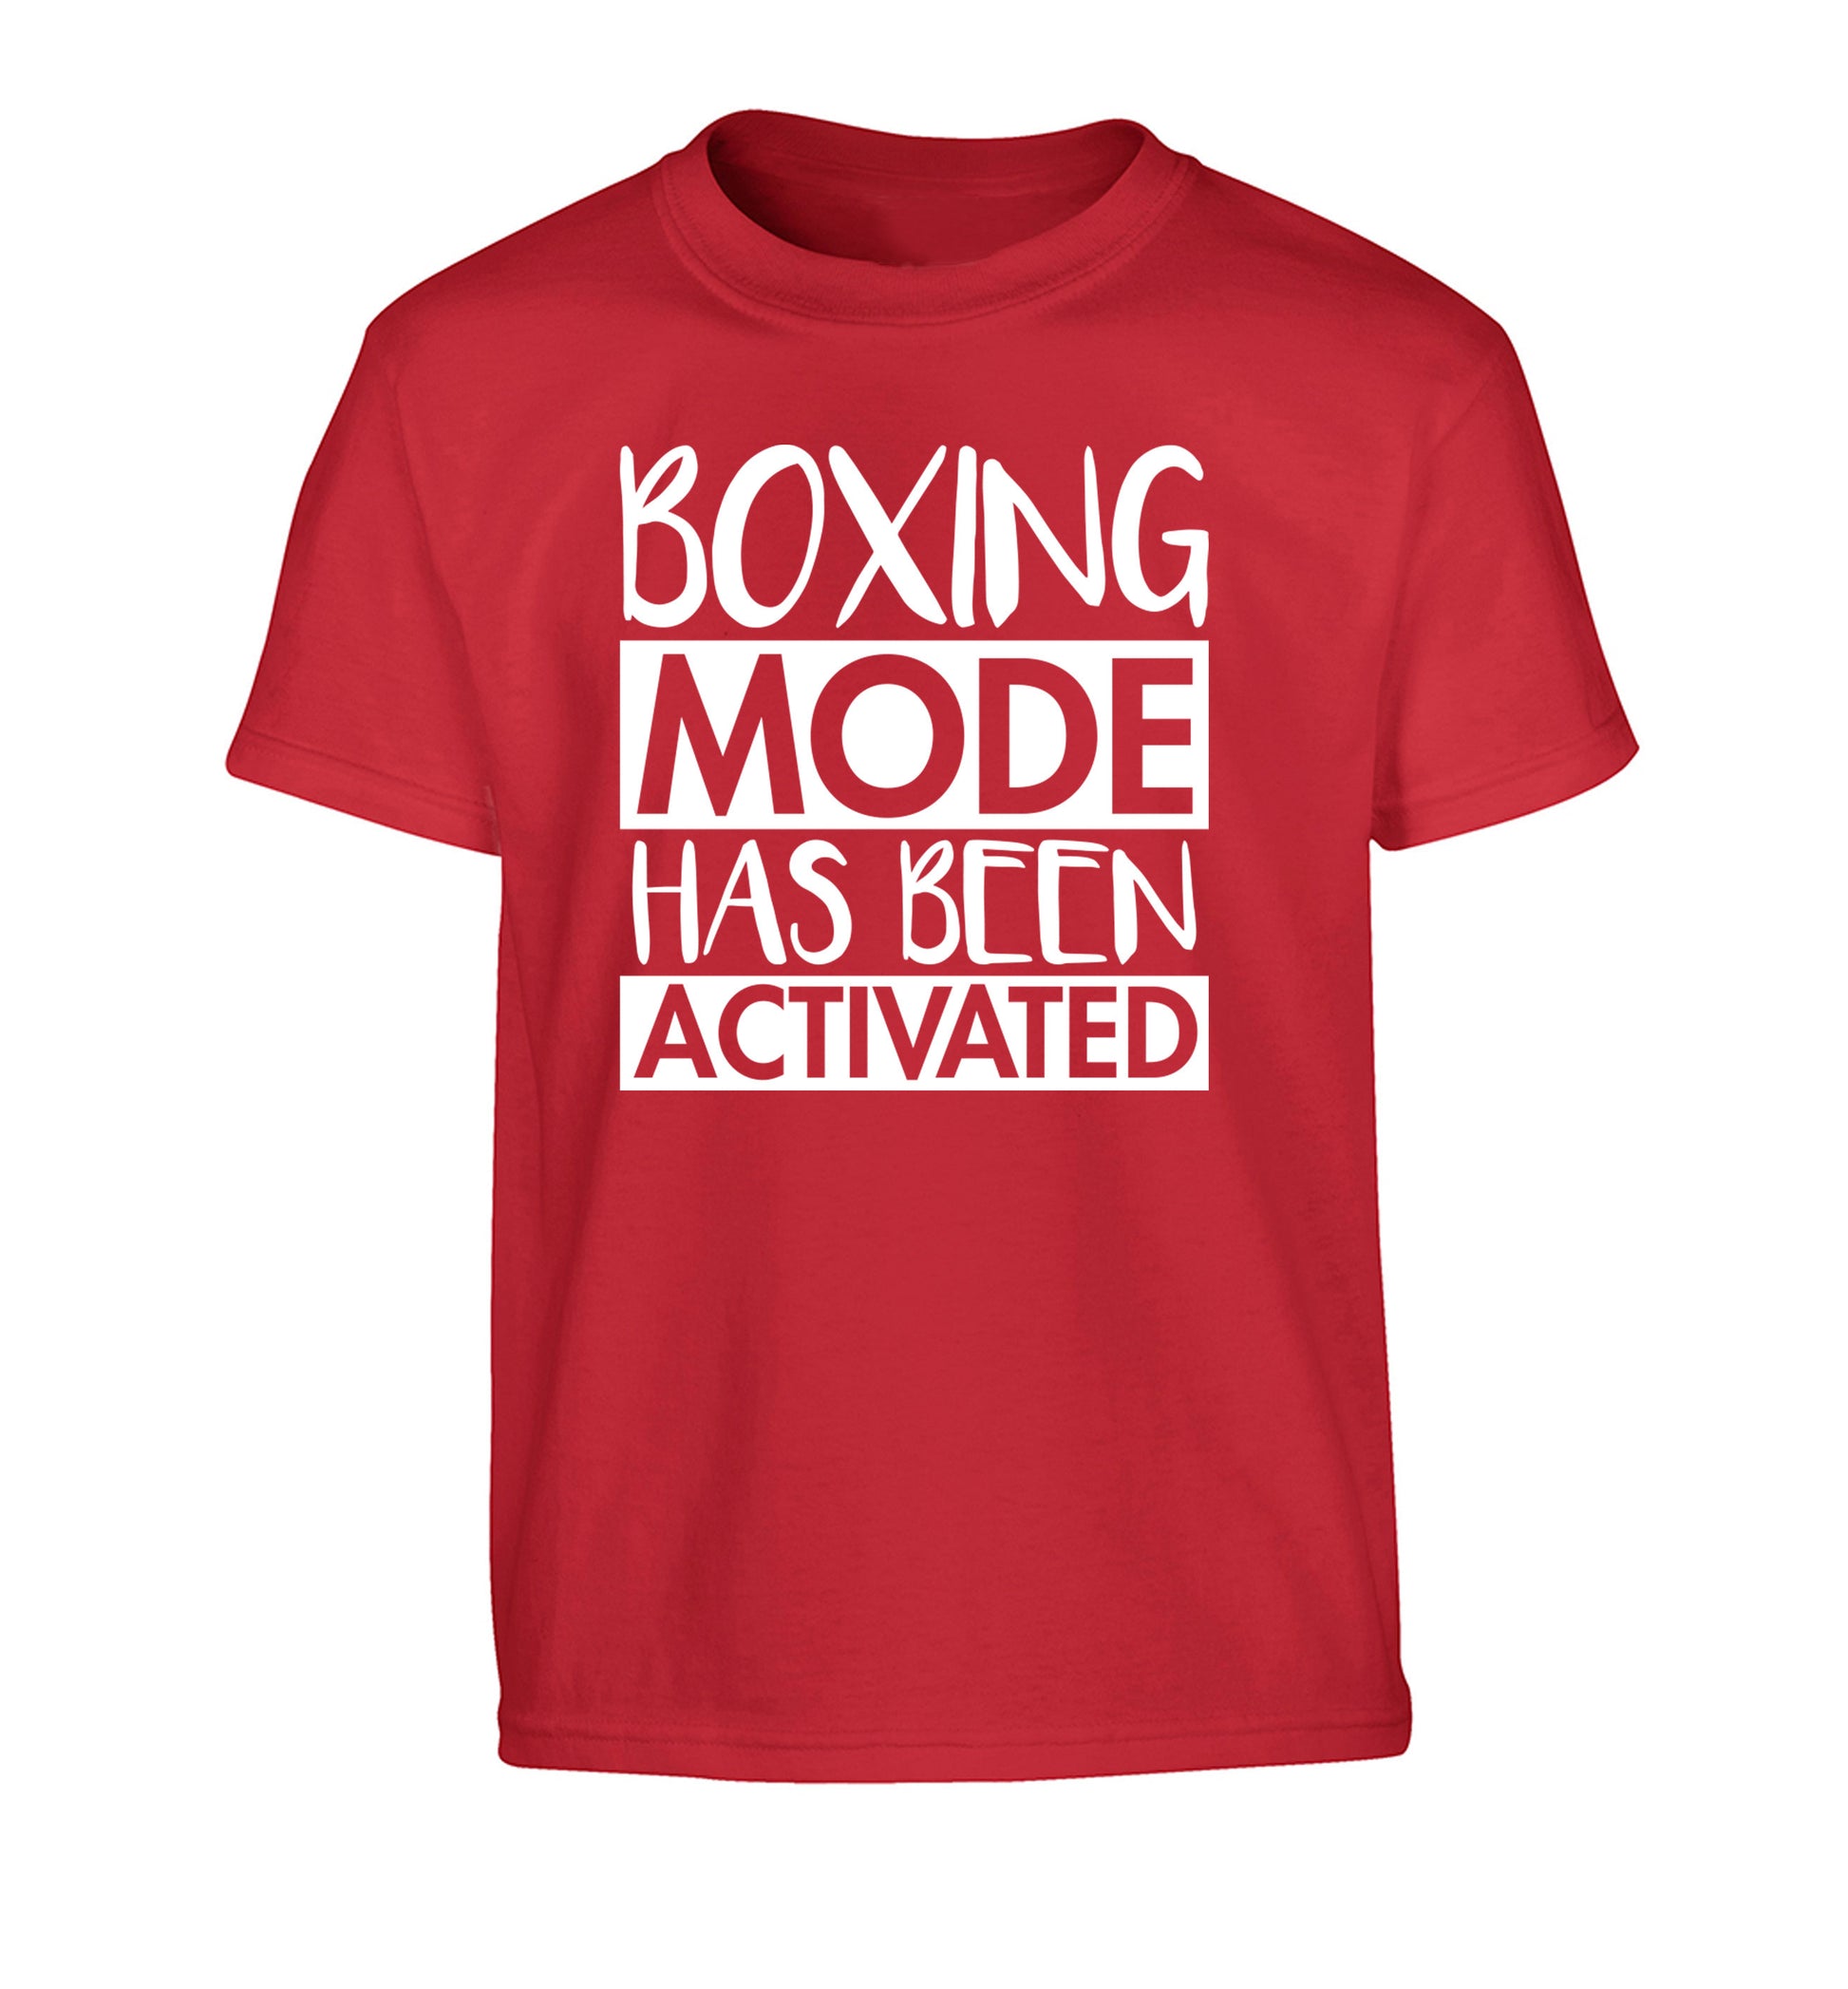 Boxing mode activated Children's red Tshirt 12-14 Years